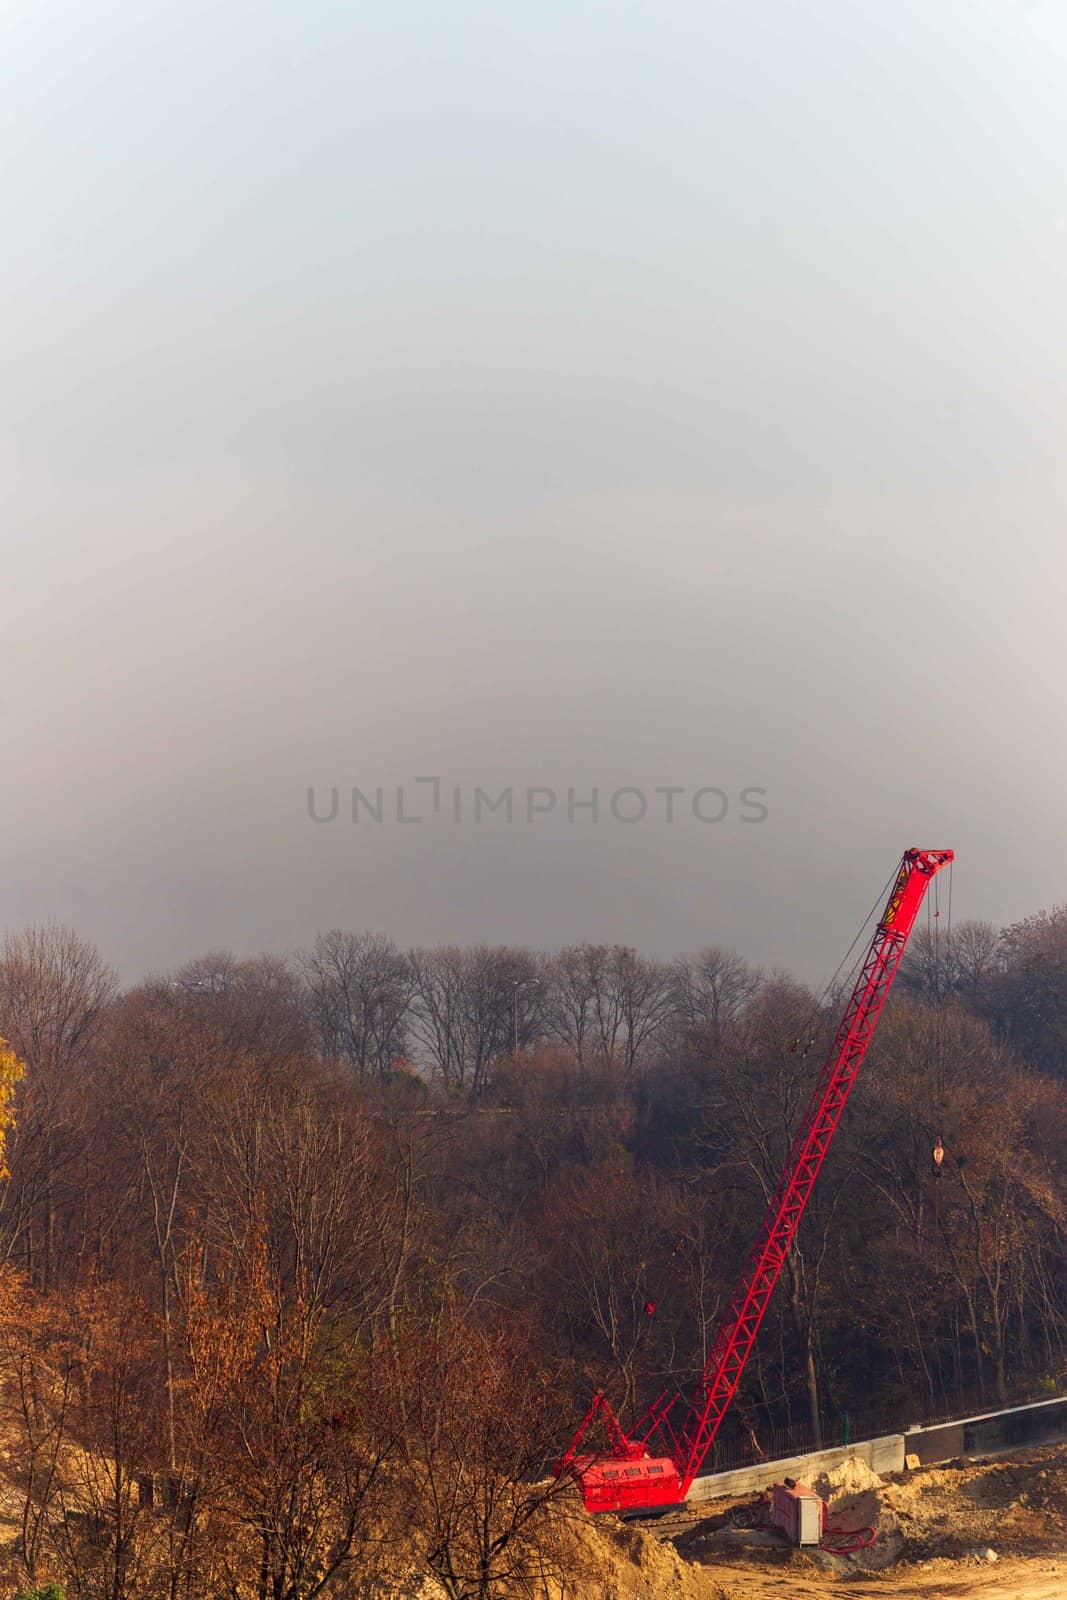 Construction process with construction automotive cranes with red and white gibbets. Autumn fog and river bridge  on blurred background. Forest around cranes.